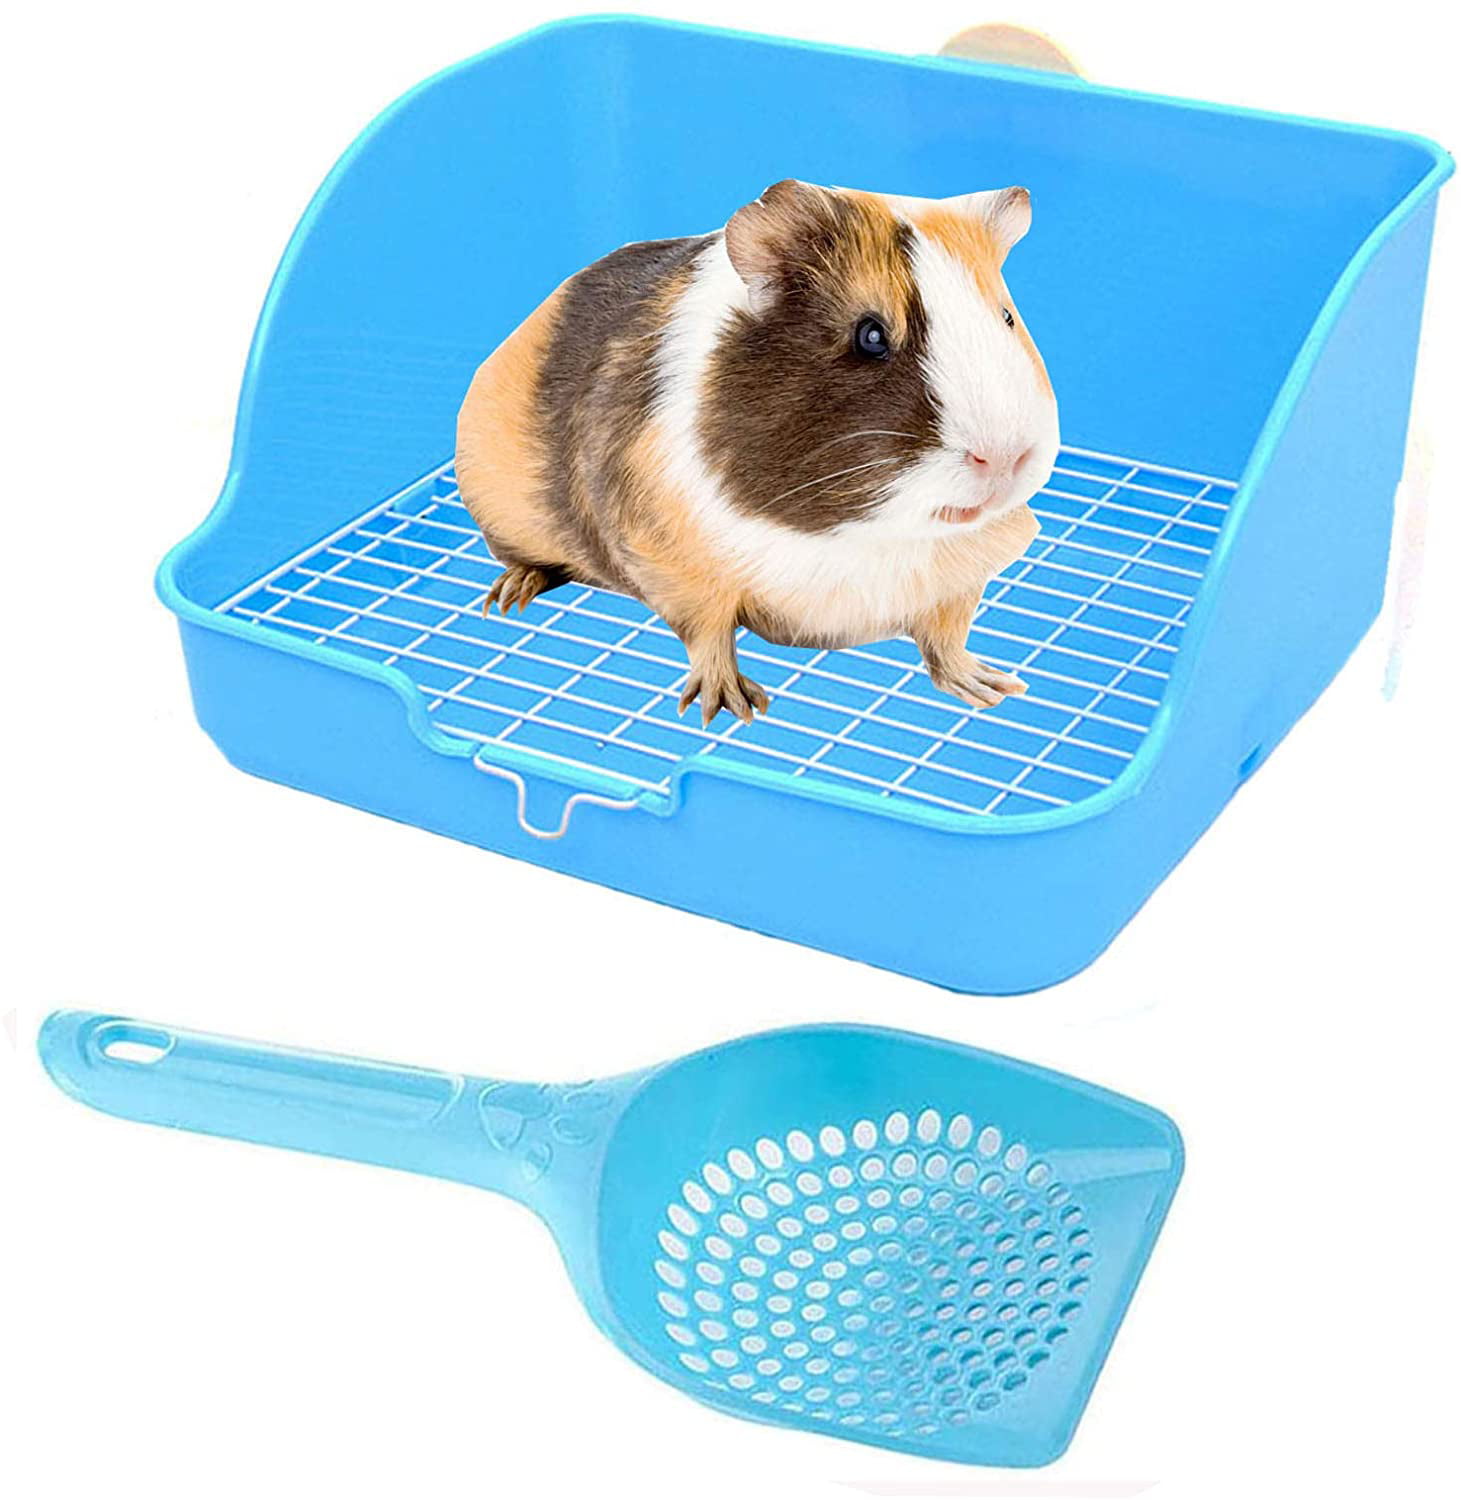 Hamiledyi Rabbit Cage Litter Box with Drawer Large Toilet Trainer Potty Corner Pet Pan for Adult Hamster Ferret Guinea Pig Chinchilla and Other Animals 